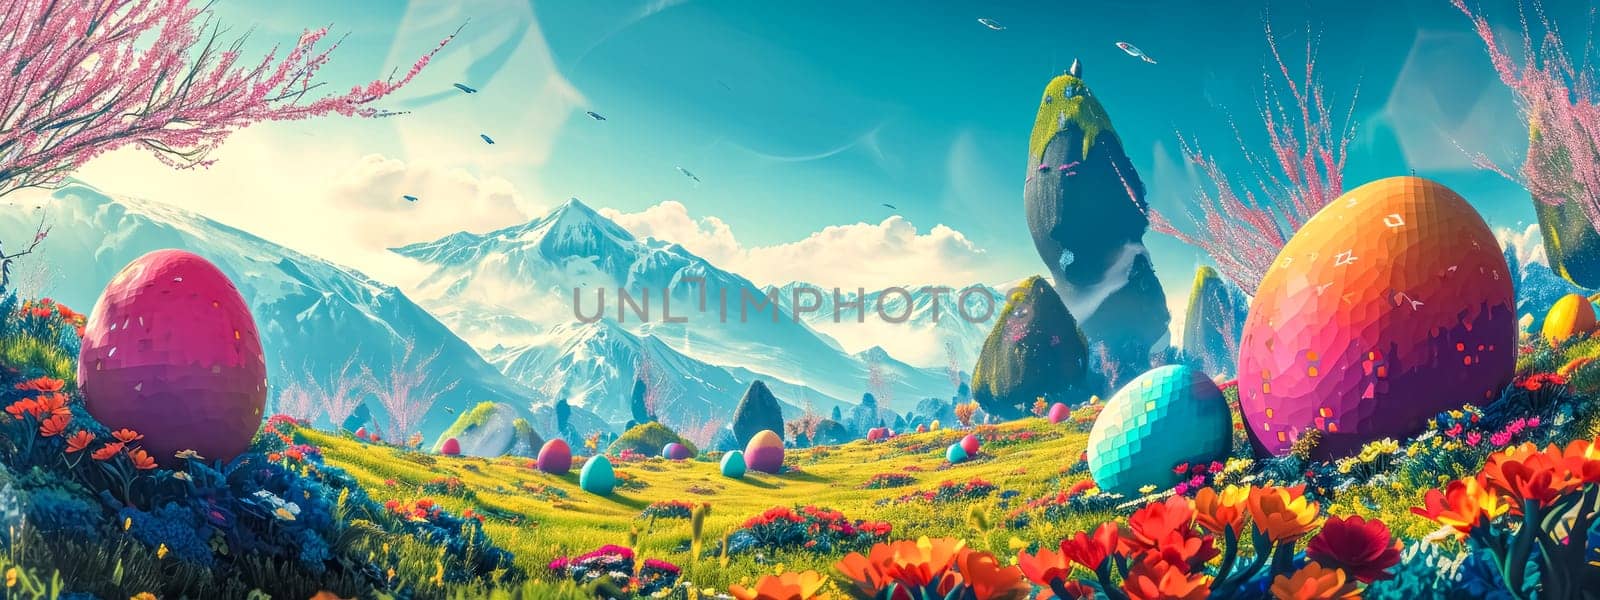 Vibrant Easter concept with oversized eggs in a mountainous landscape. by Edophoto